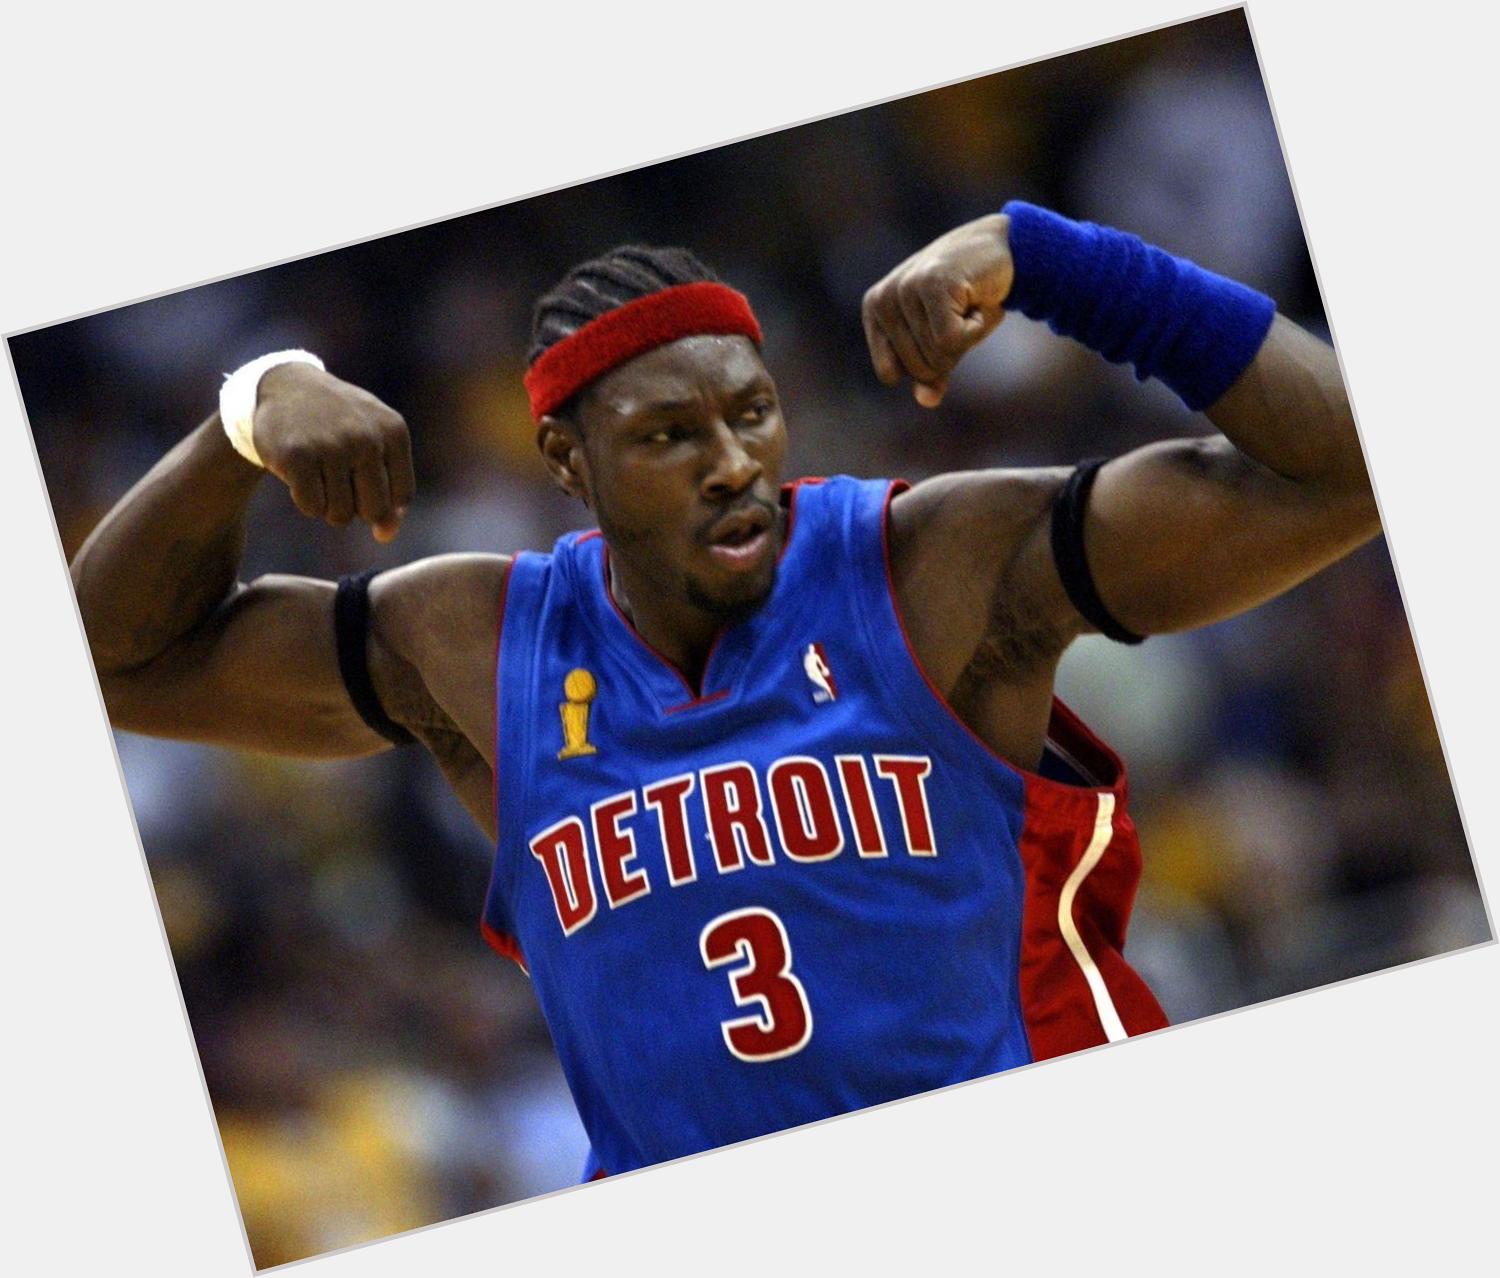 Ben Wallace exclusive hot pic 3